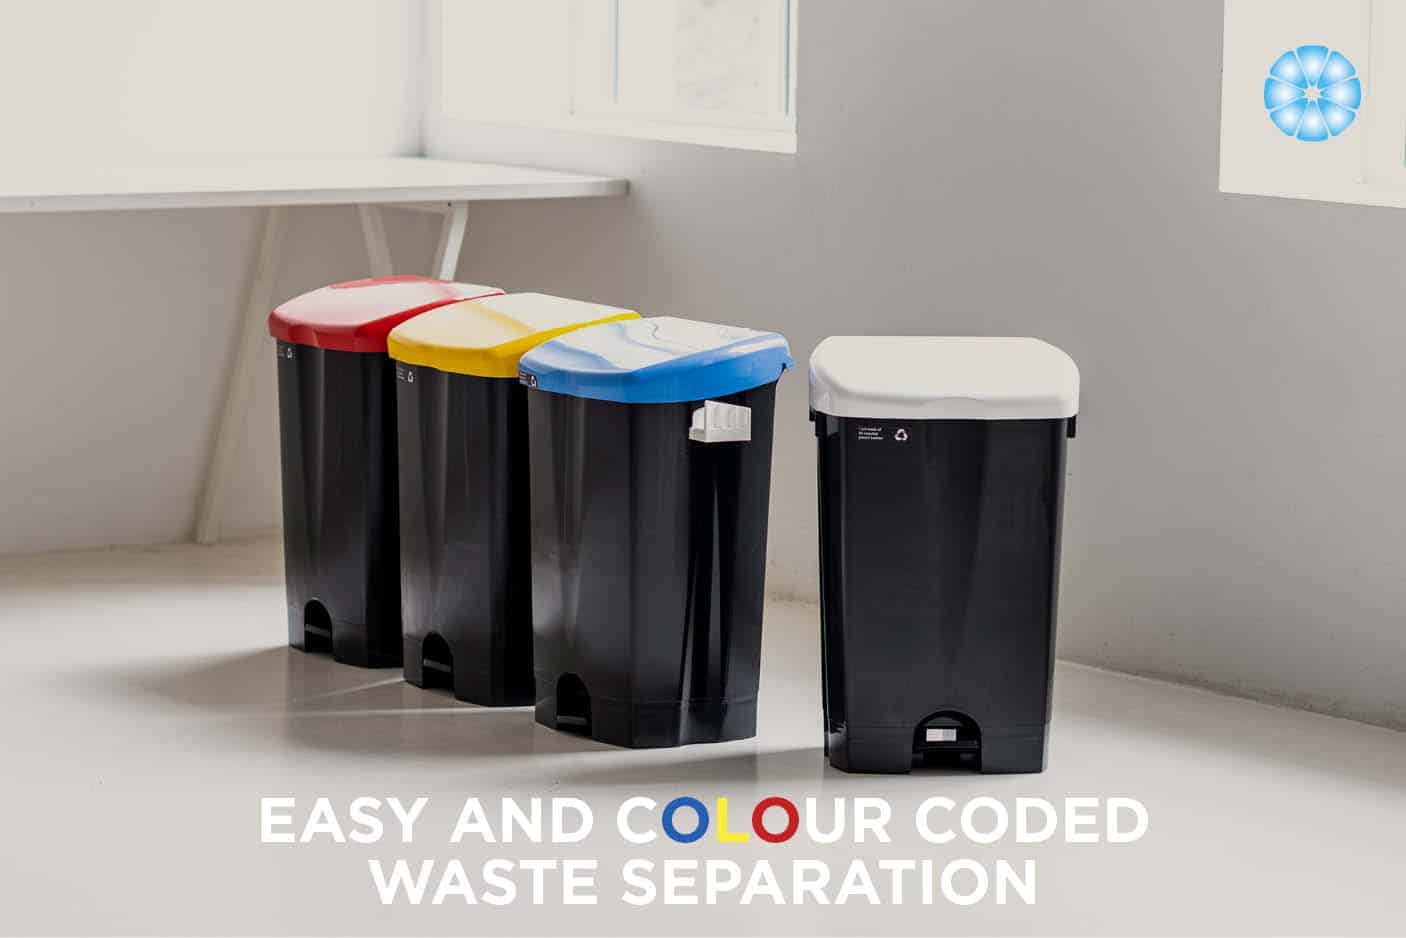 Nordic Recycle Waste Management - in colours